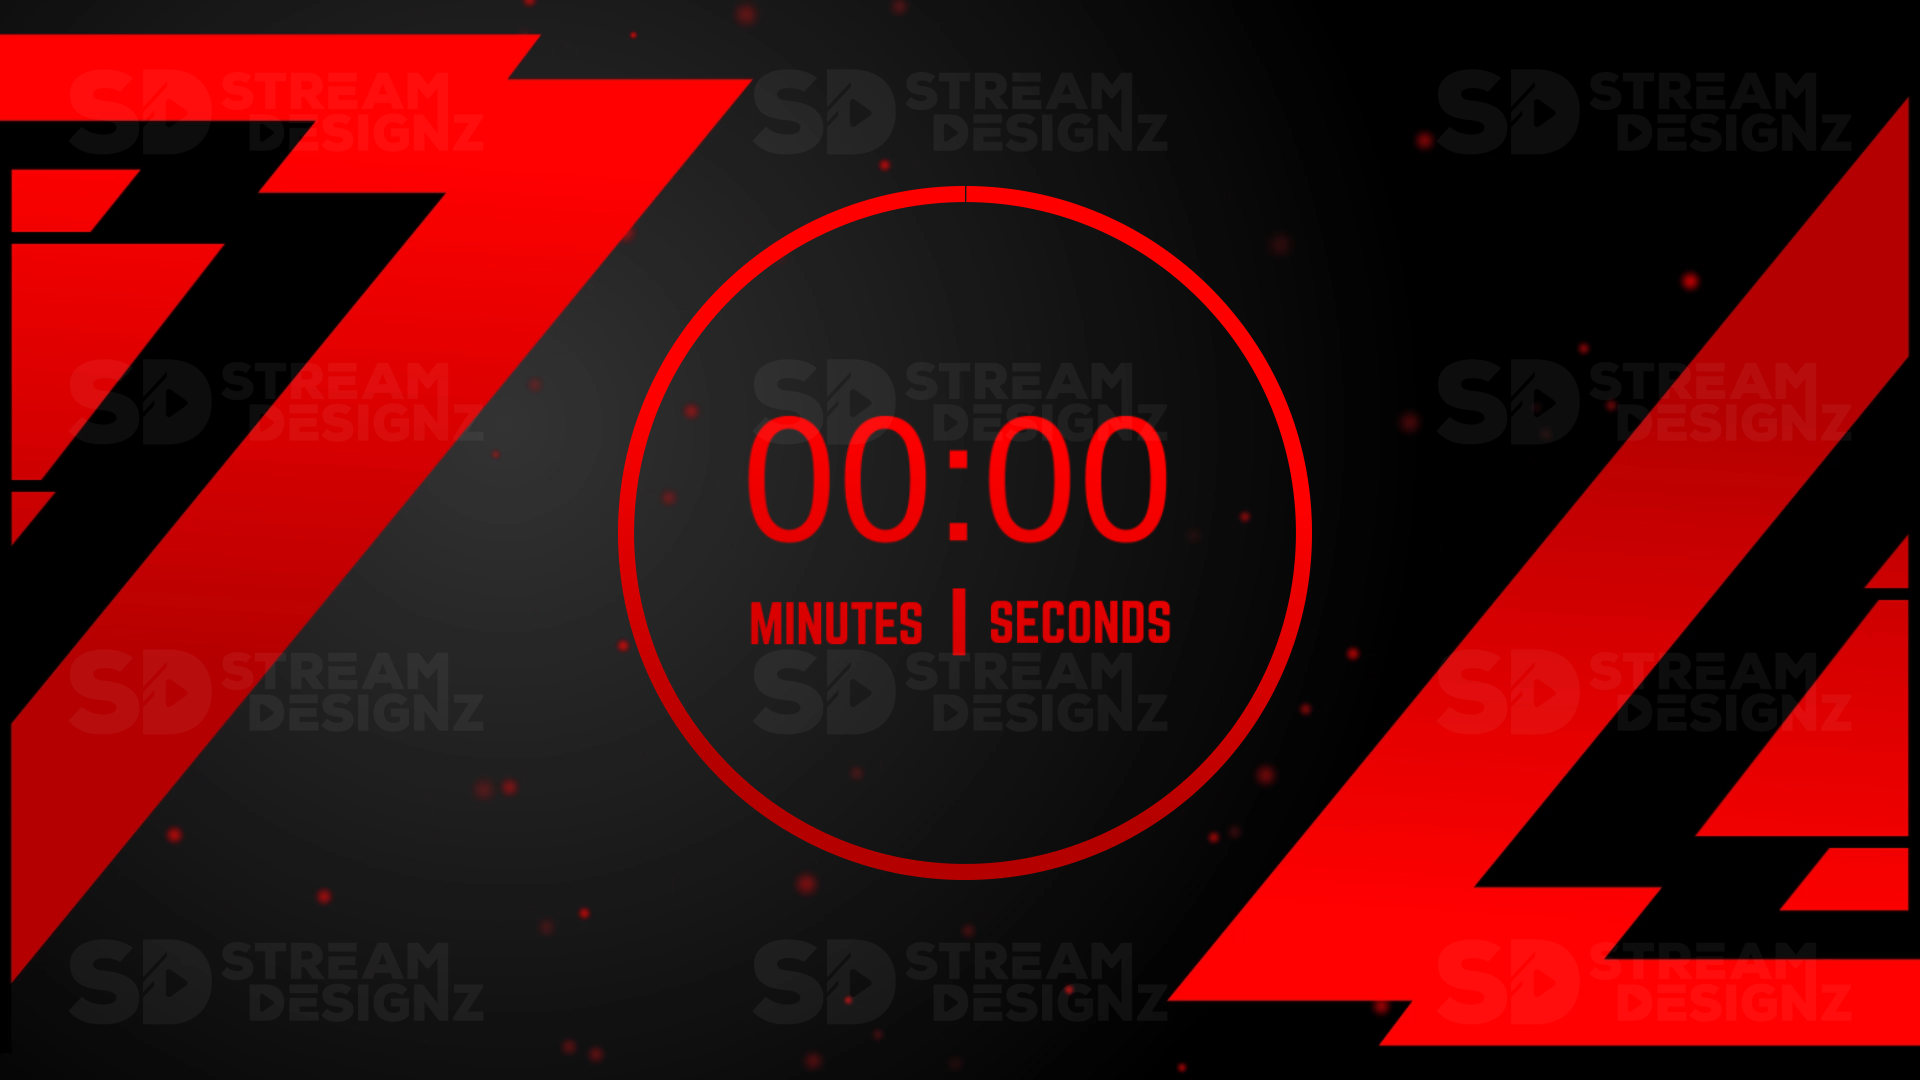 5 minute count up timer rogue preview video stream designz